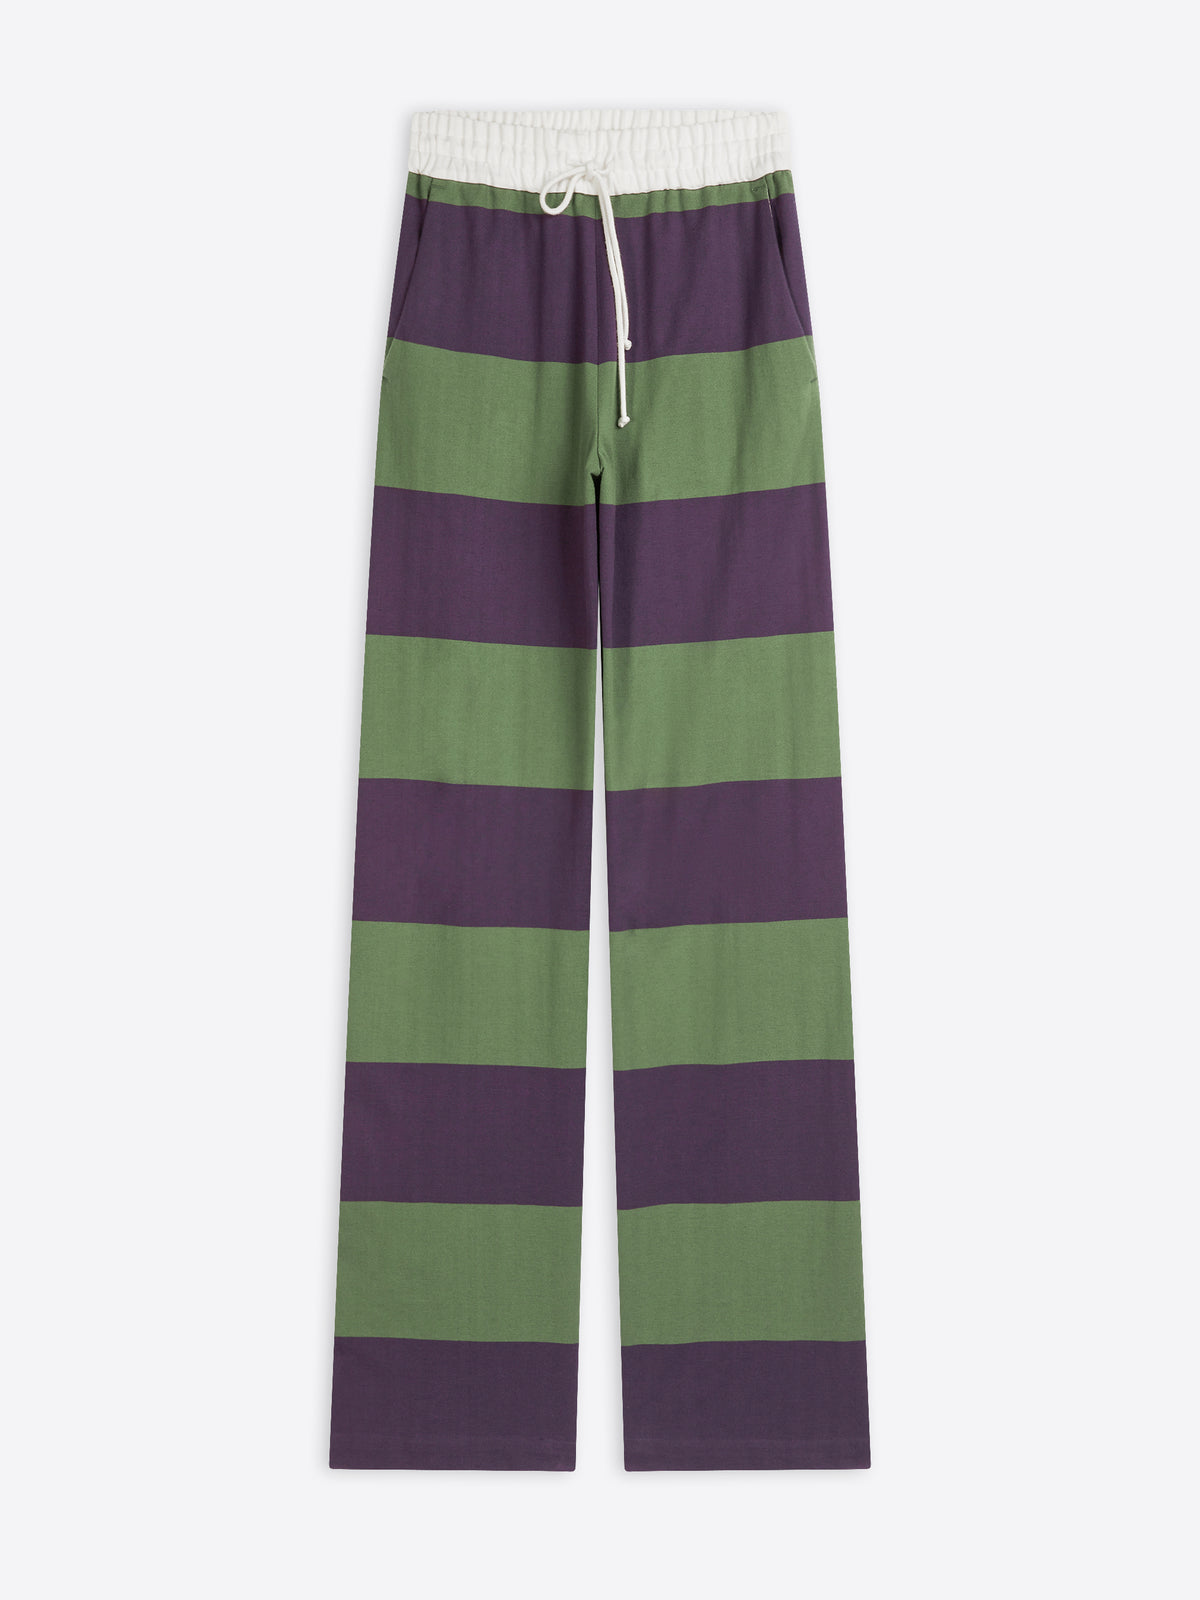 Rugby striped pants